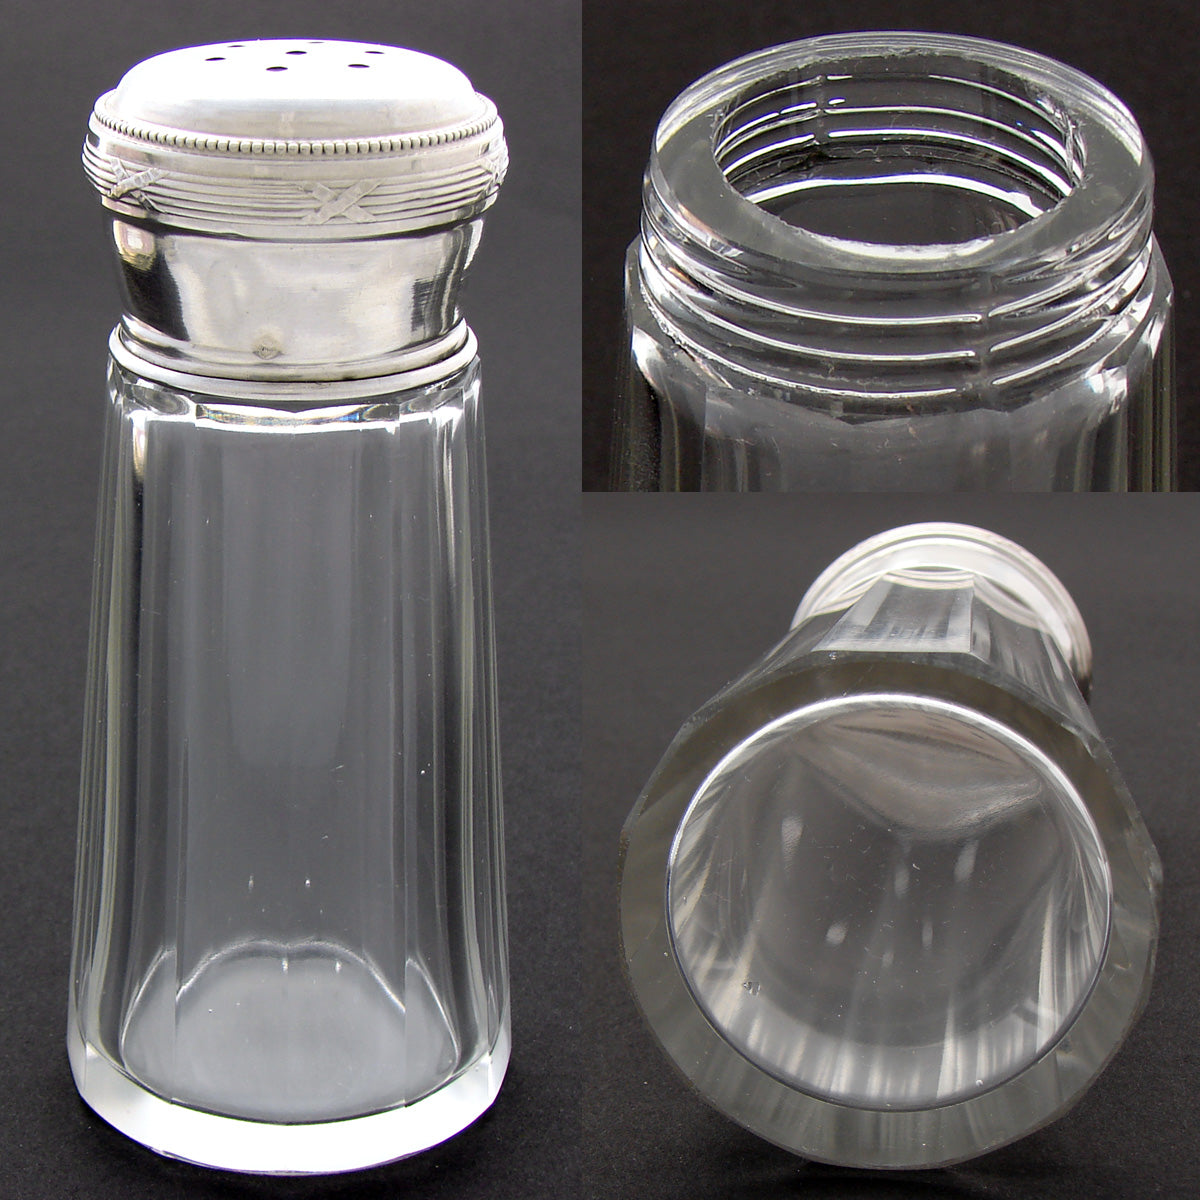 Fine Vintage French Sterling Silver & Cut Glass 5.25” Sugar Shaker, Sifter, Muffineer